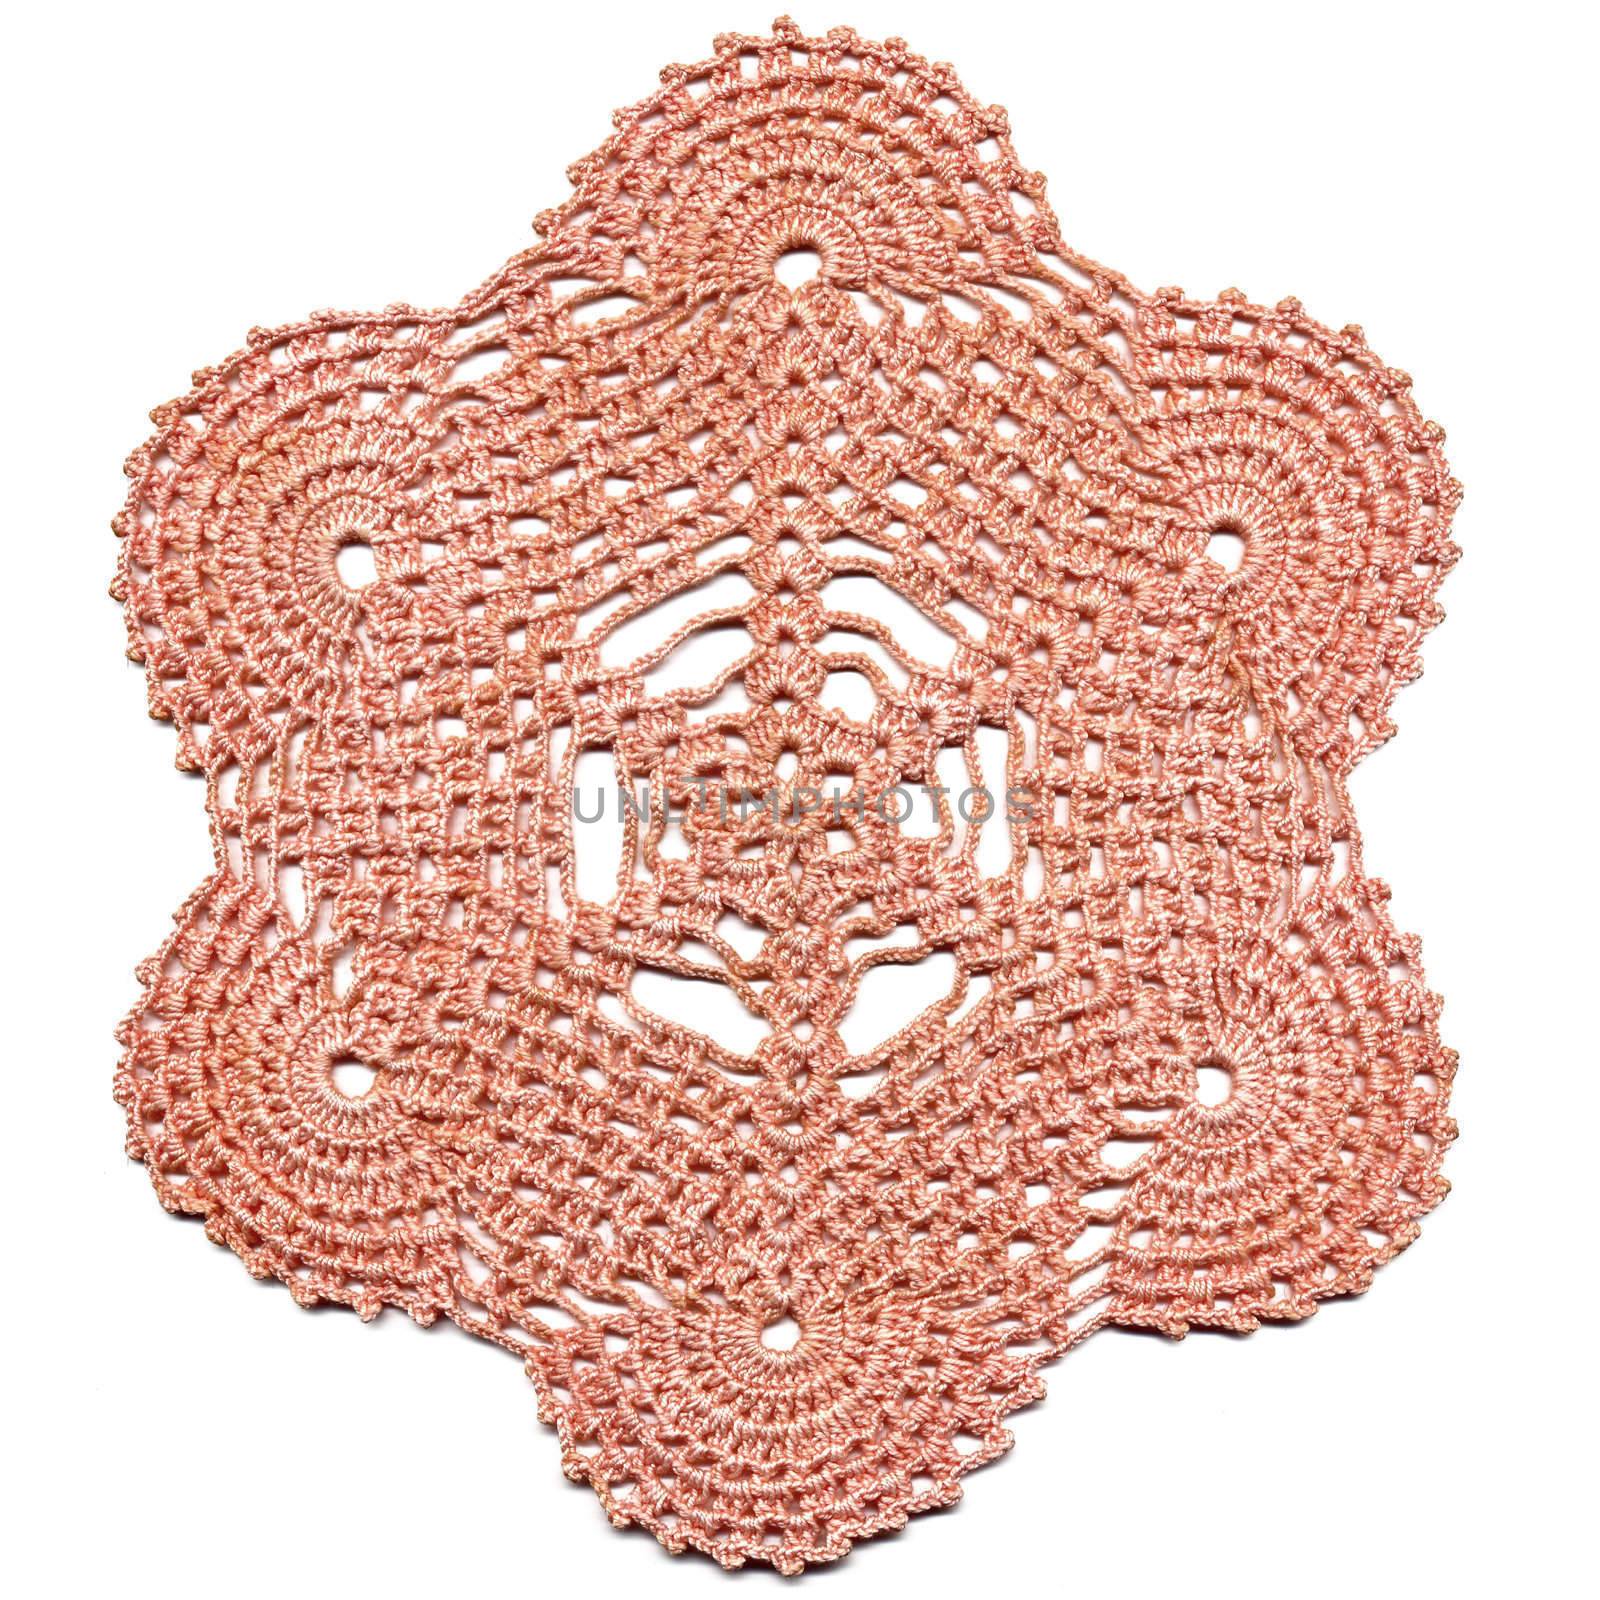 Hand made crocheted doily.